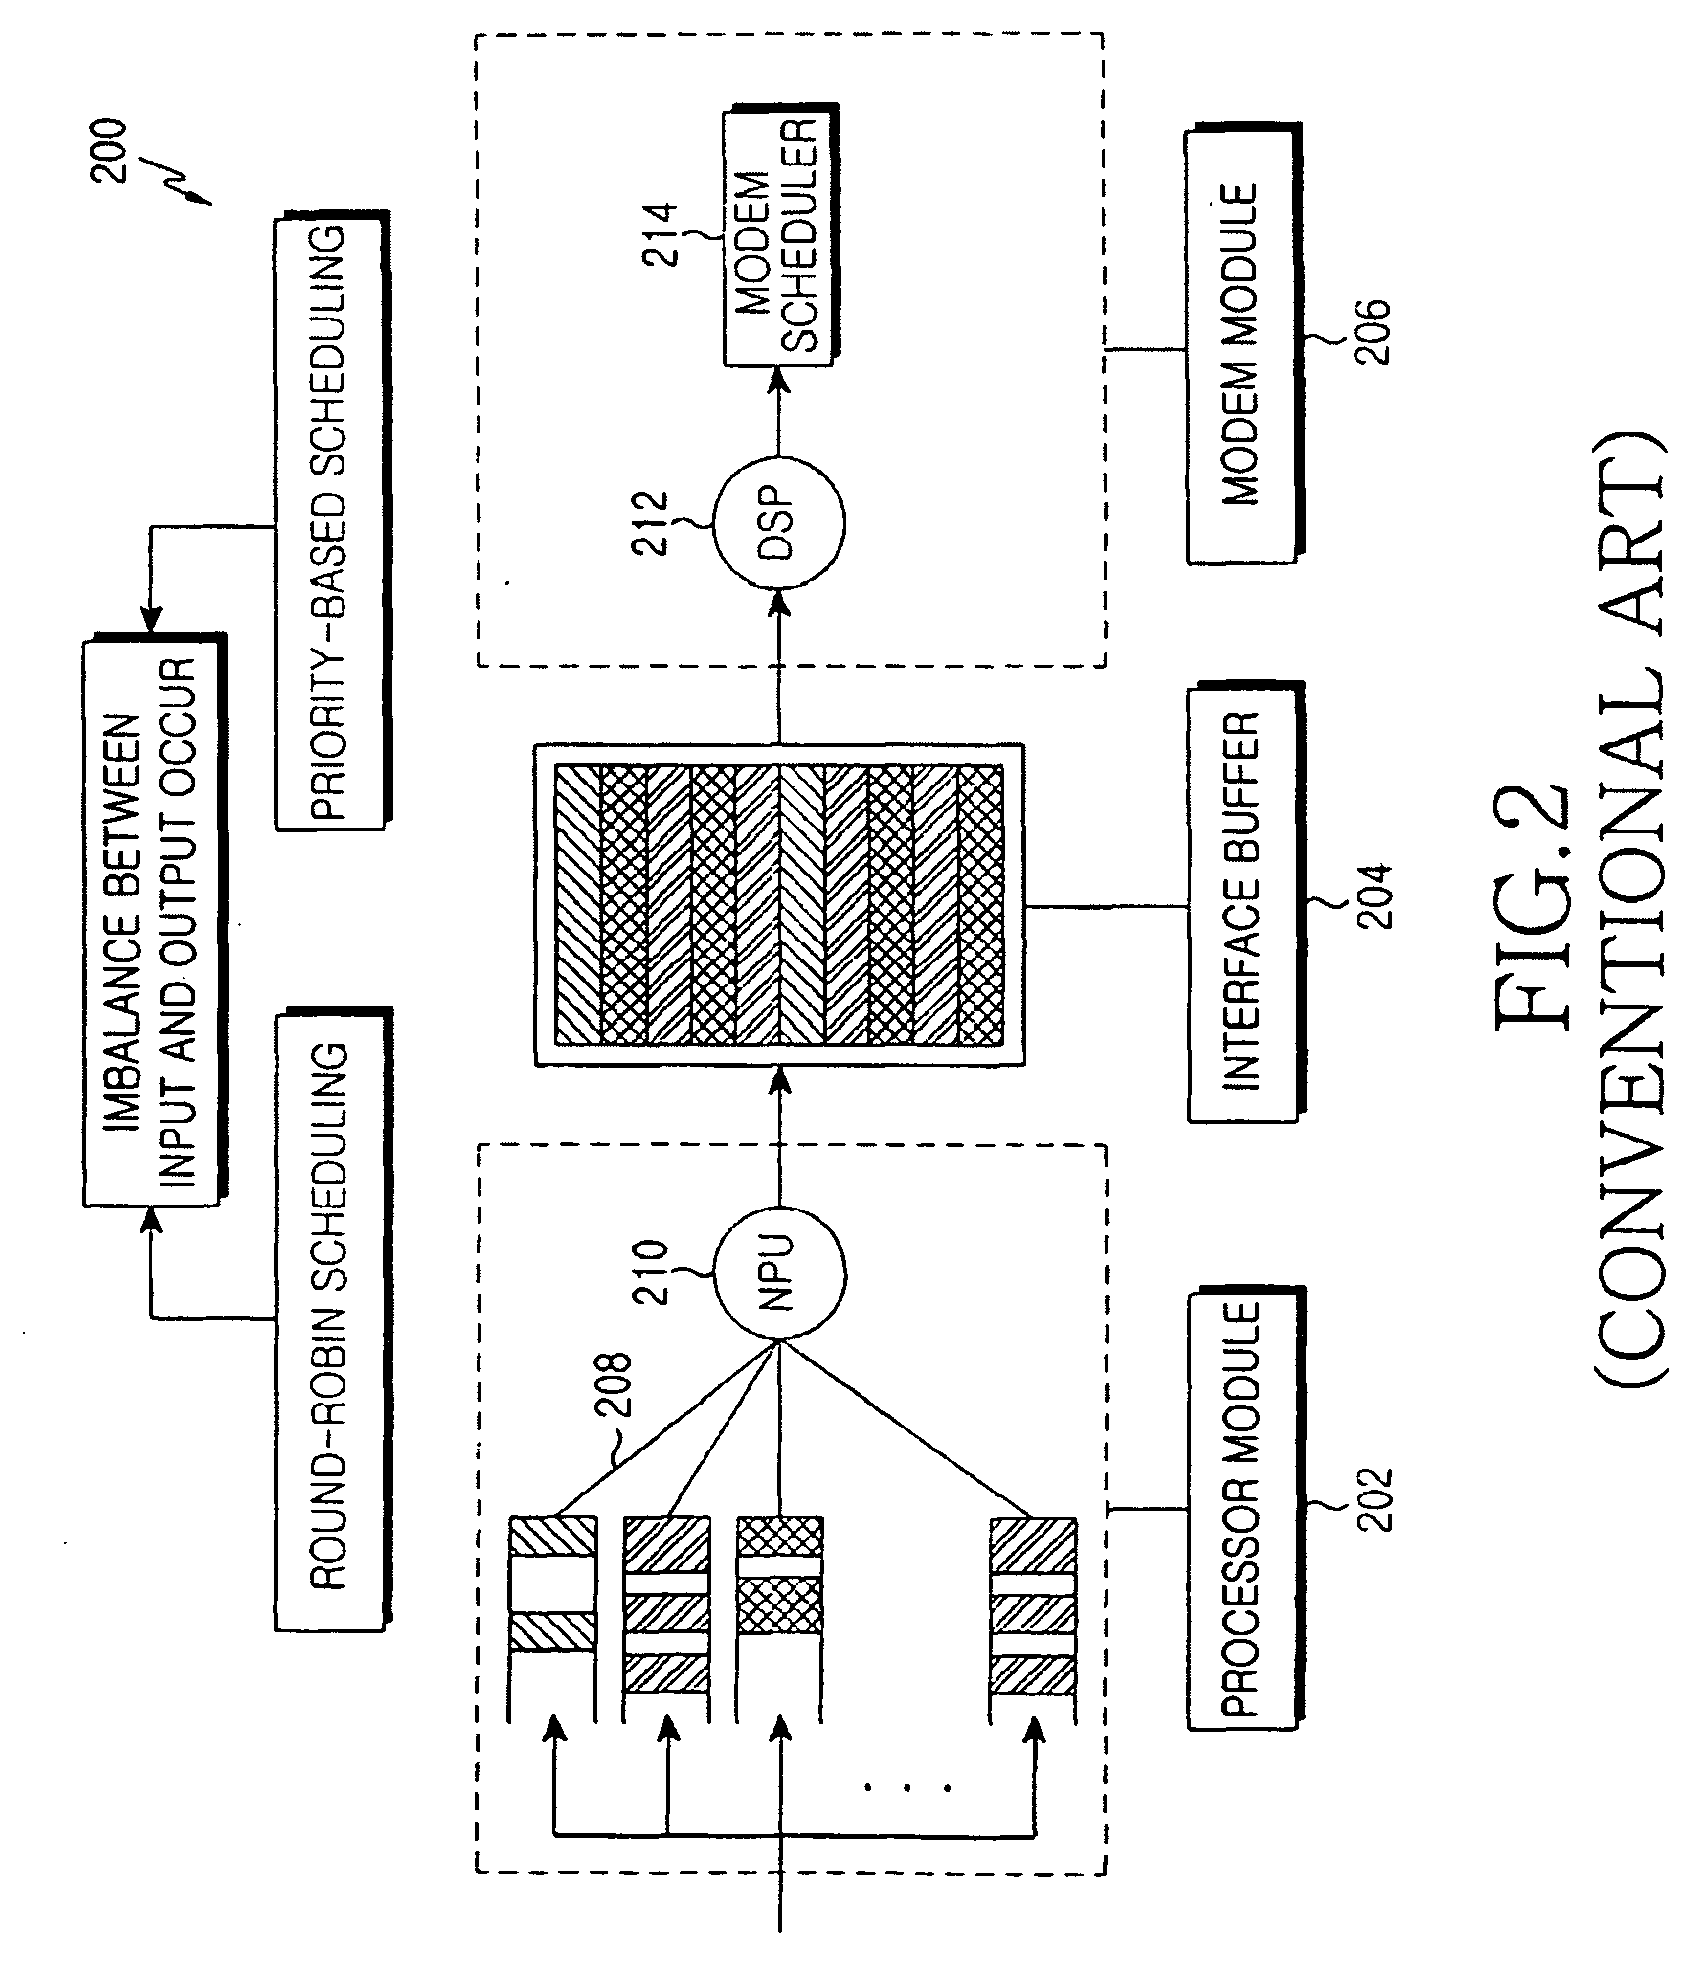 Method and apparatus for managing a buffer in a communication system